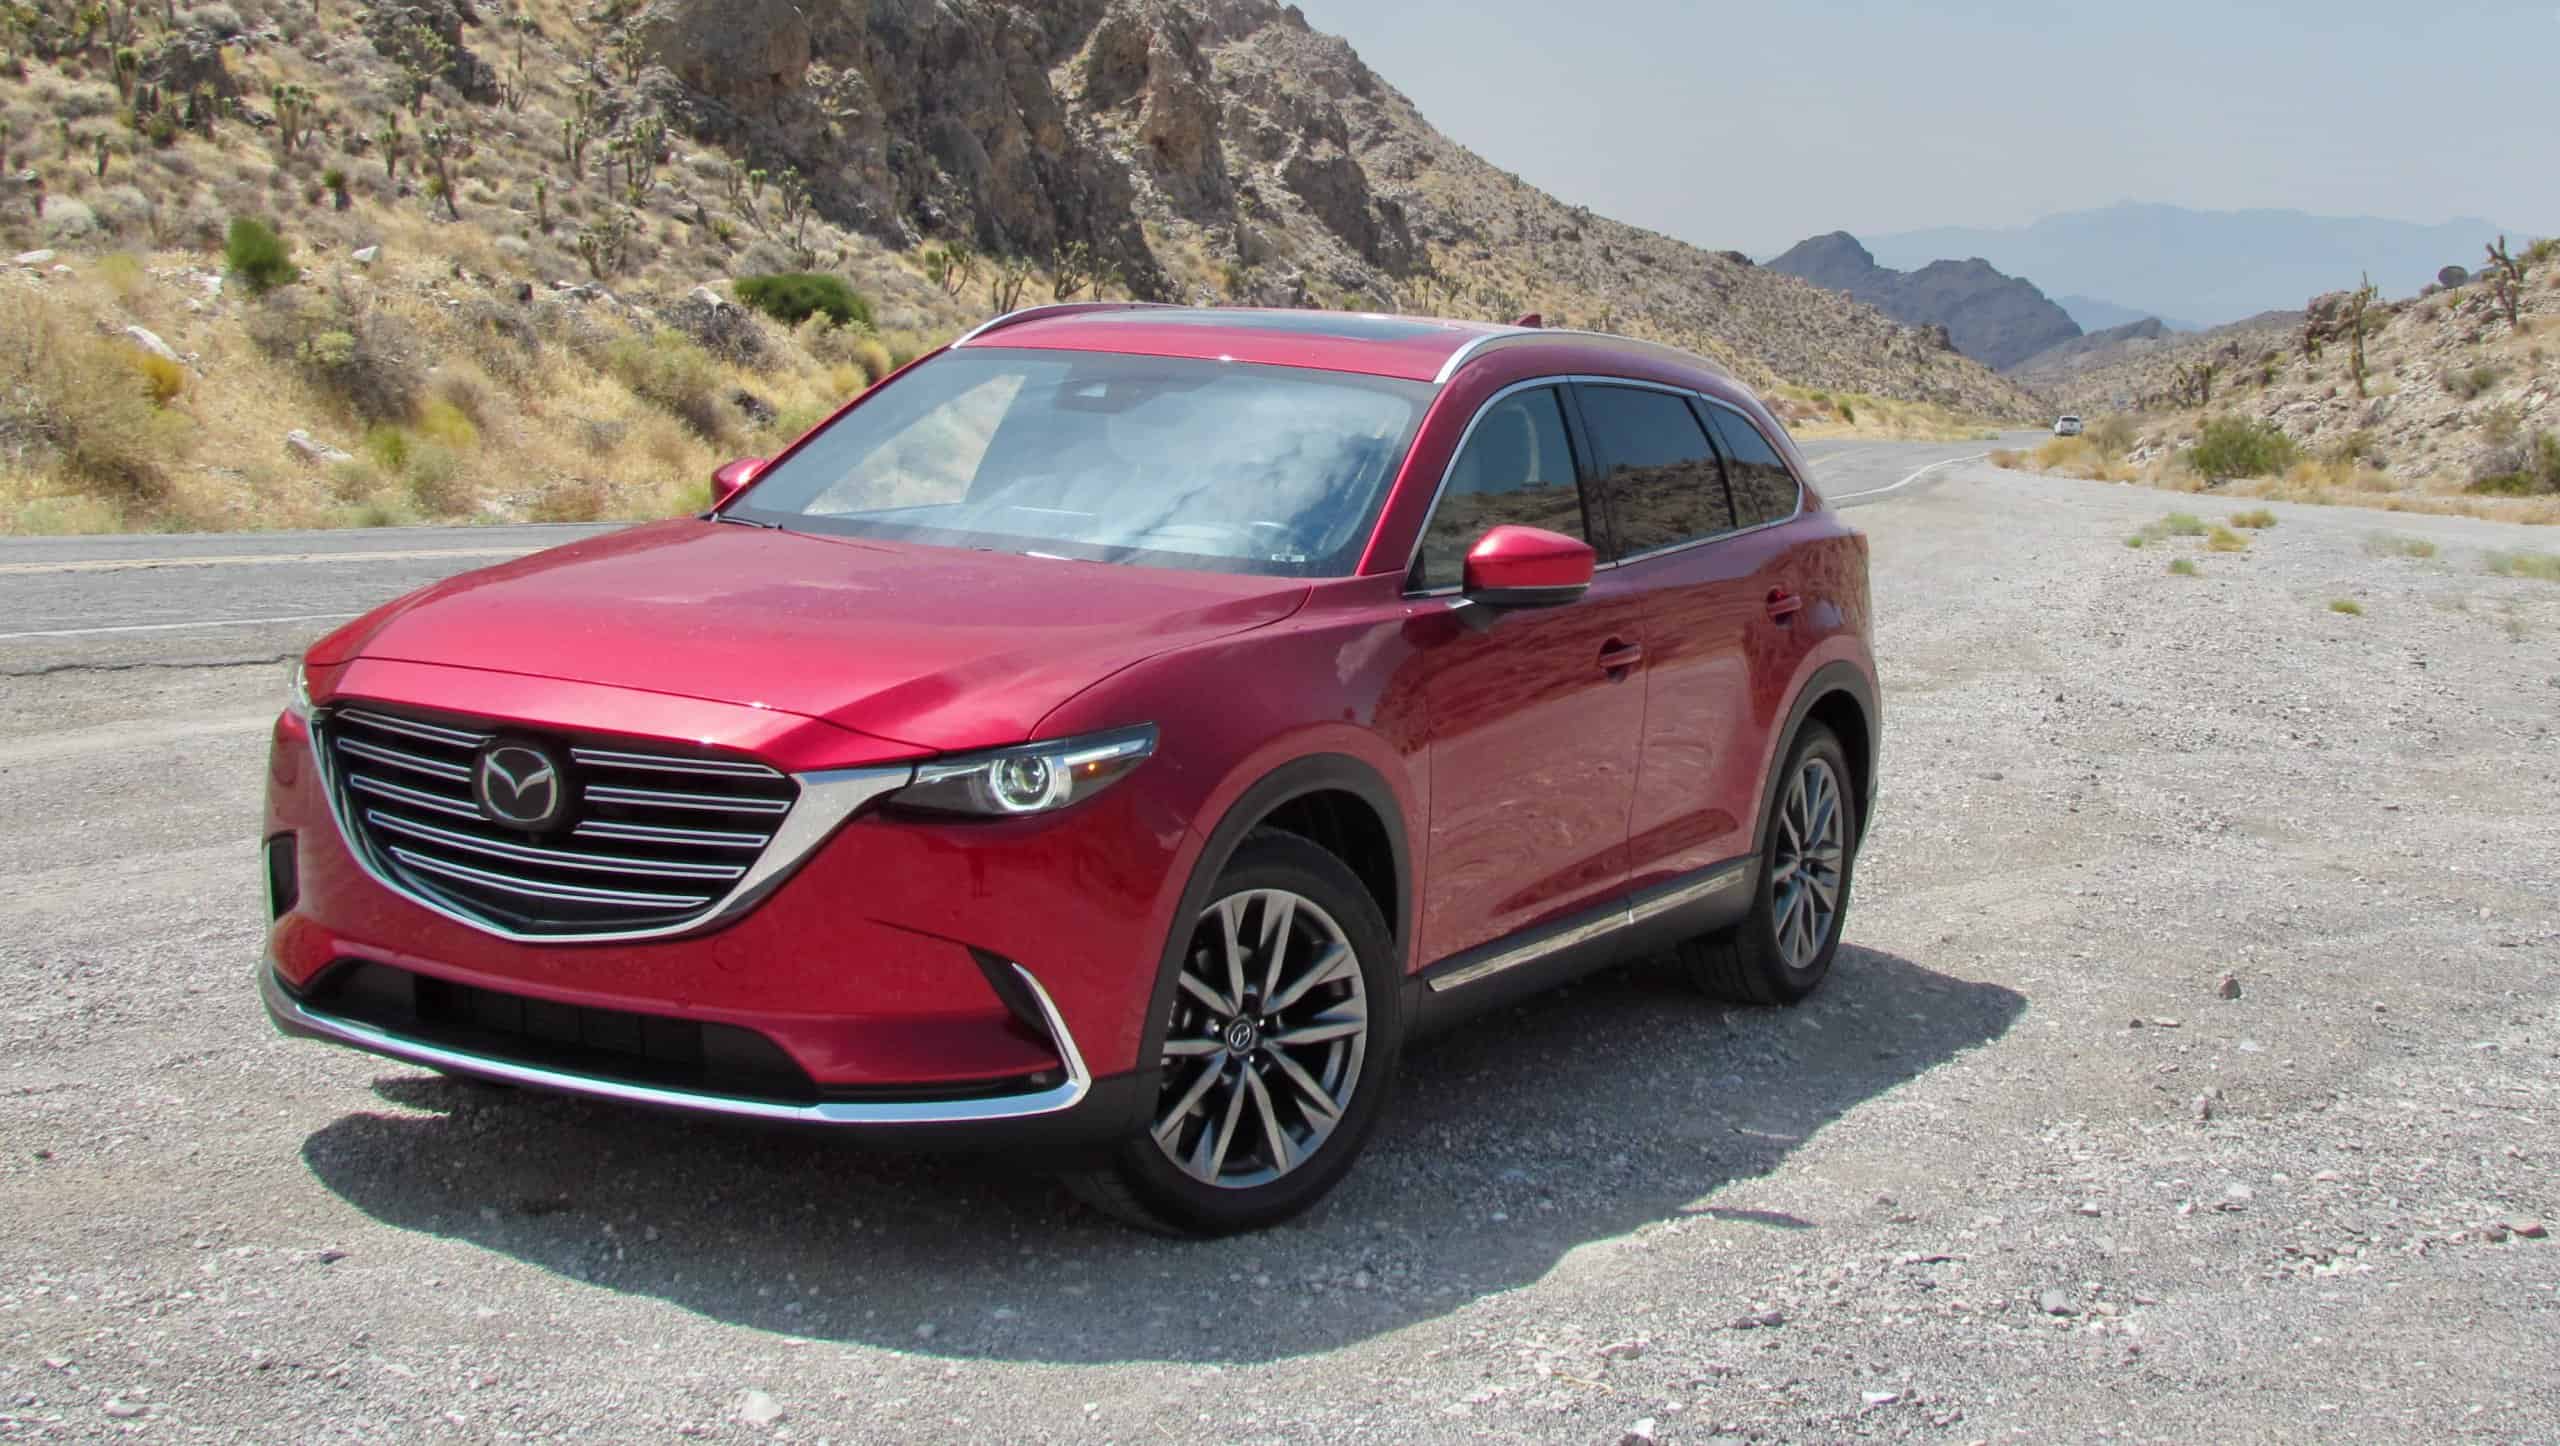 Driven: Mazda CX-9 has 3 rows of fun for the family, and for the driver